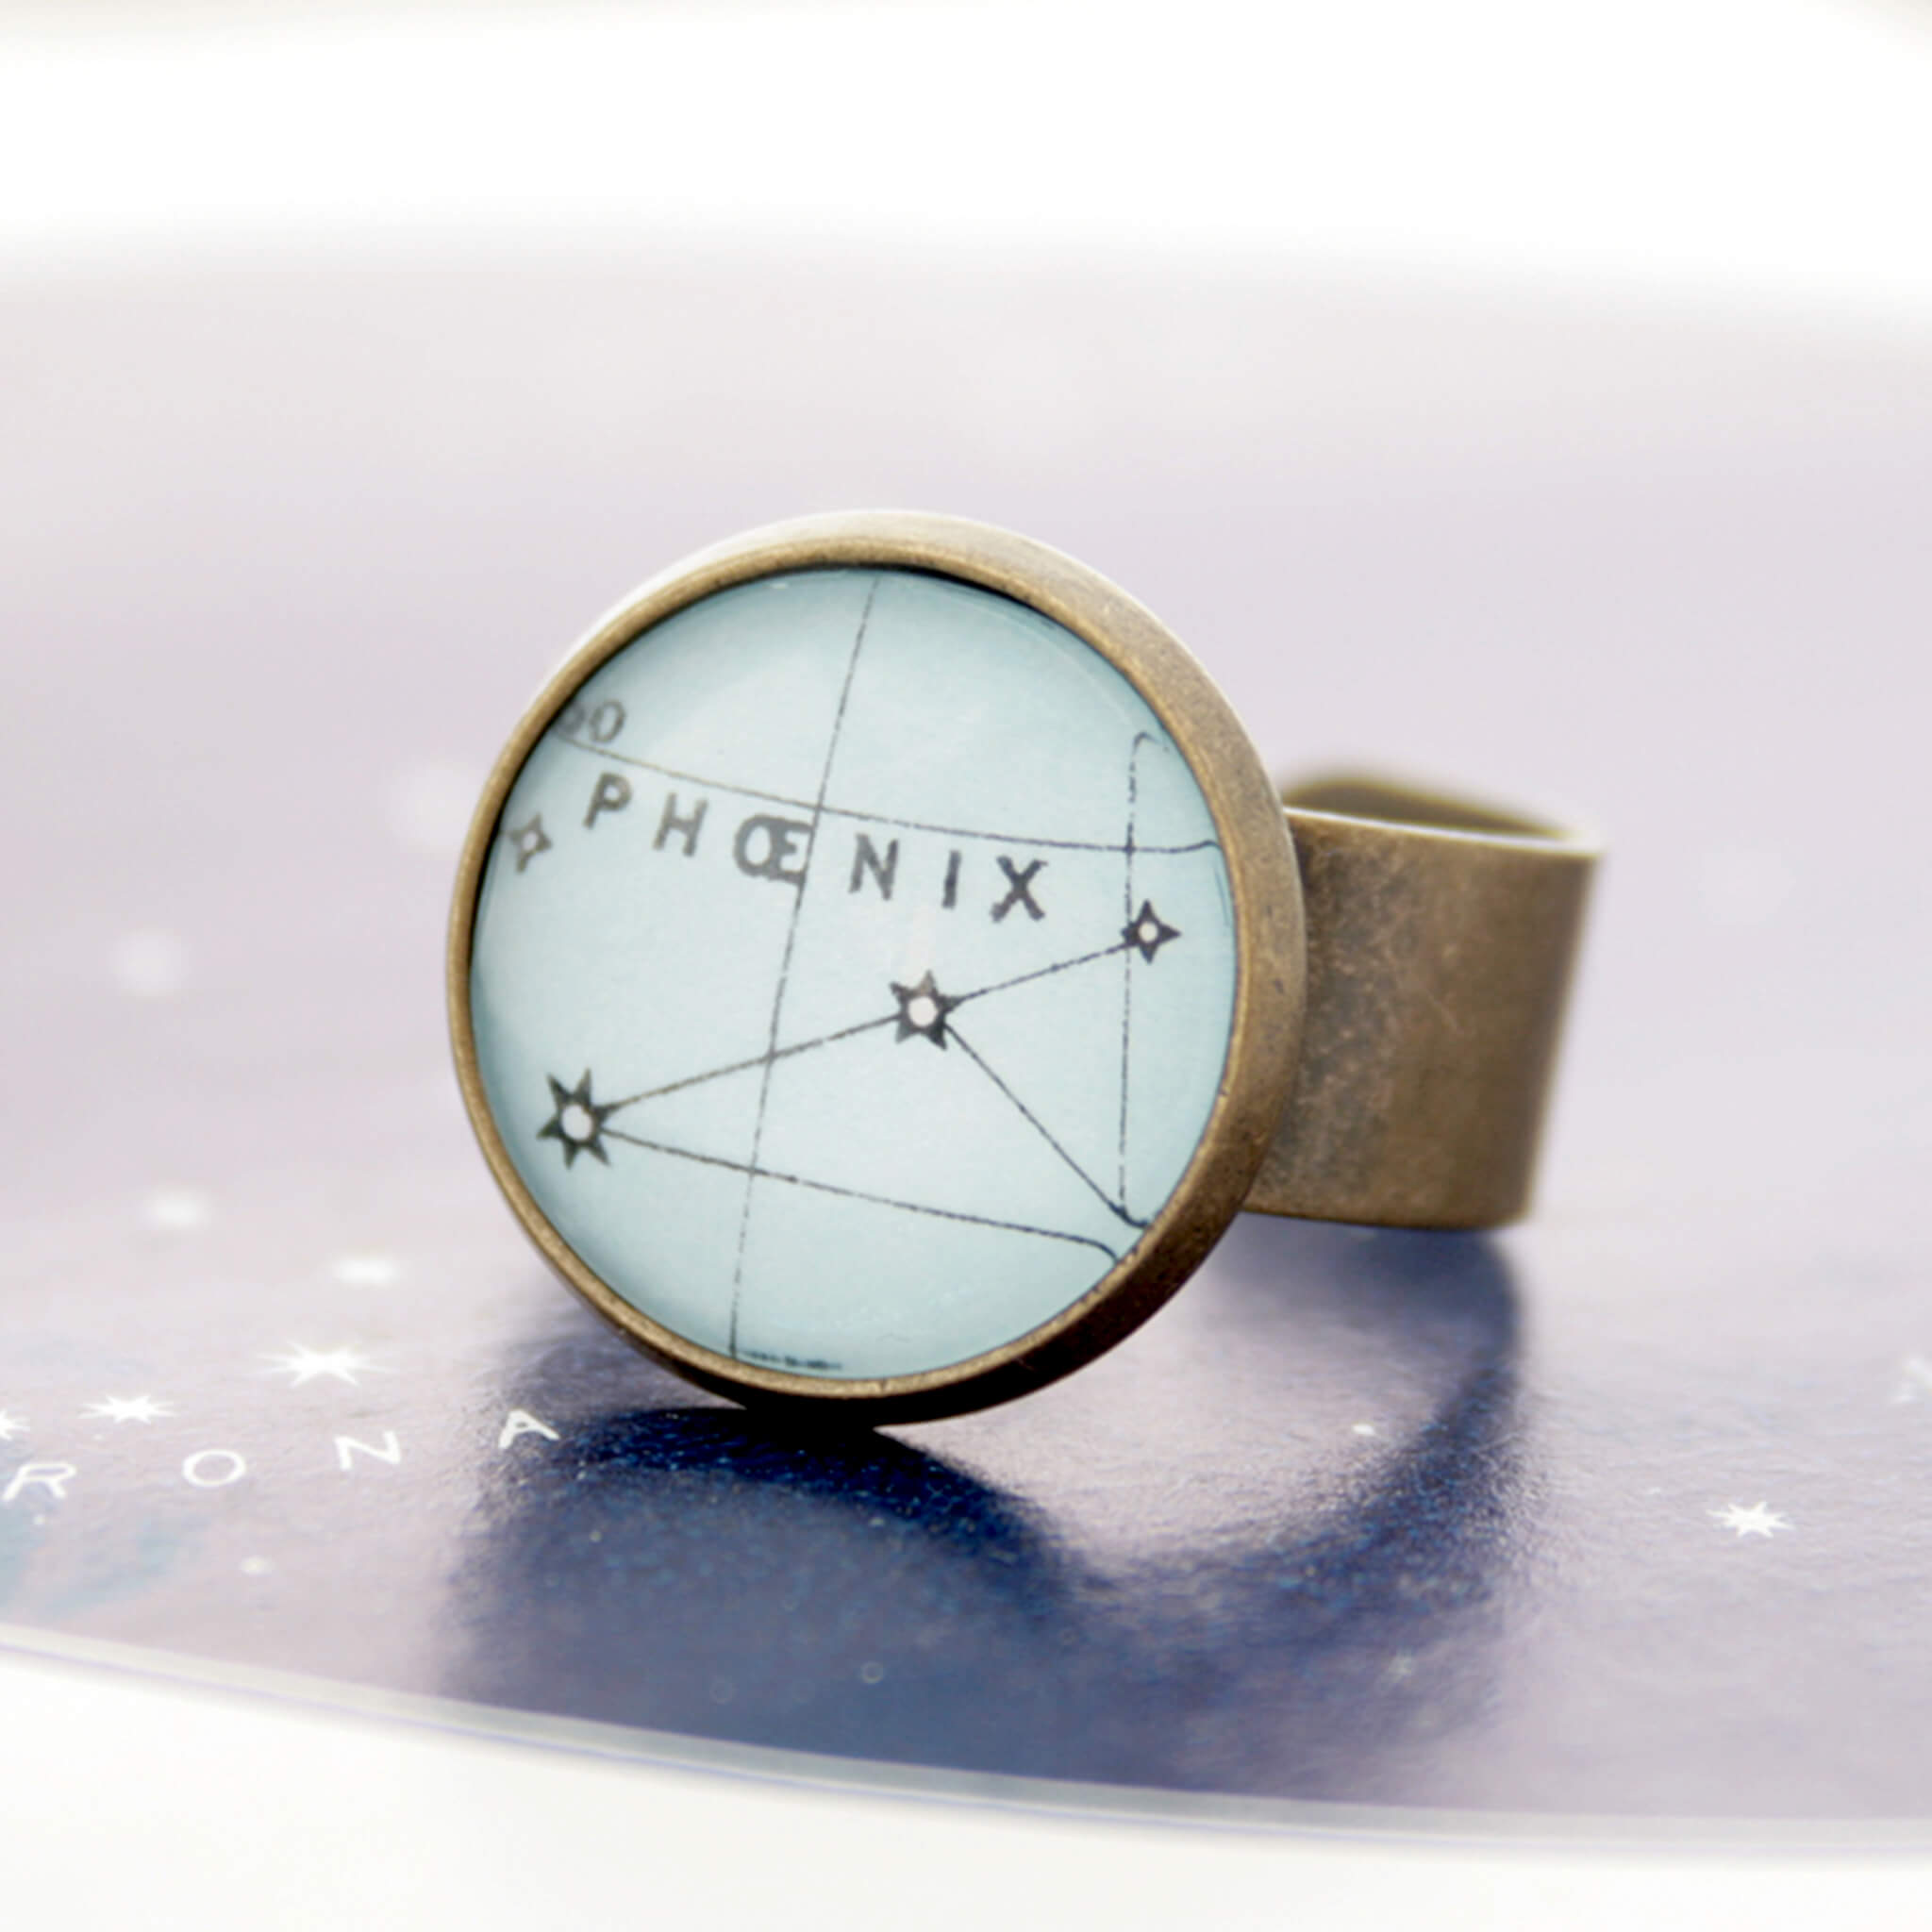 Bronze ring featuring map of heaven with Phoenix